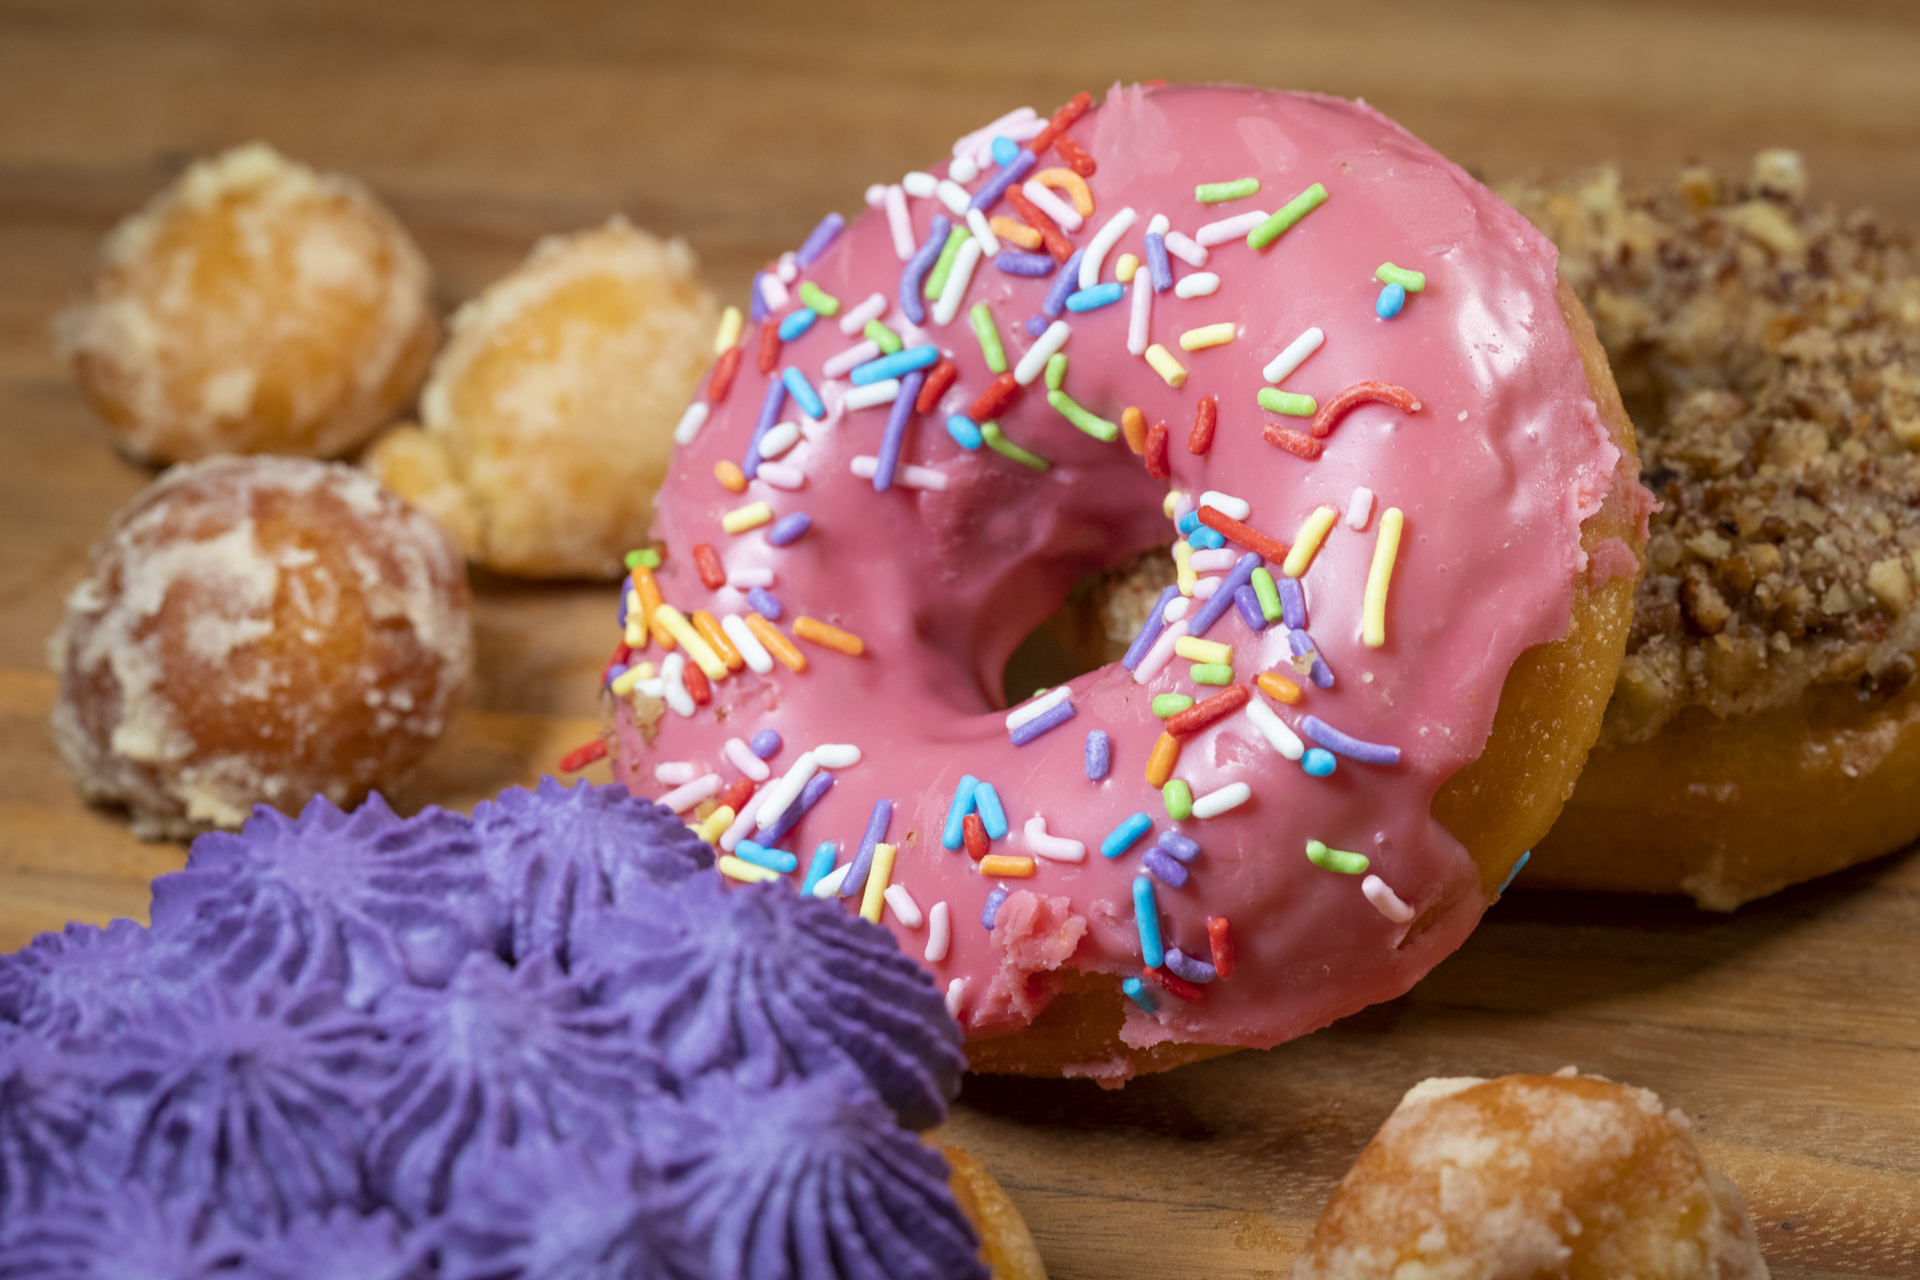 Hot in the City: Donut disturb, Stephanie's Donuts are a hole lot of yum (with sprinkles on top!)